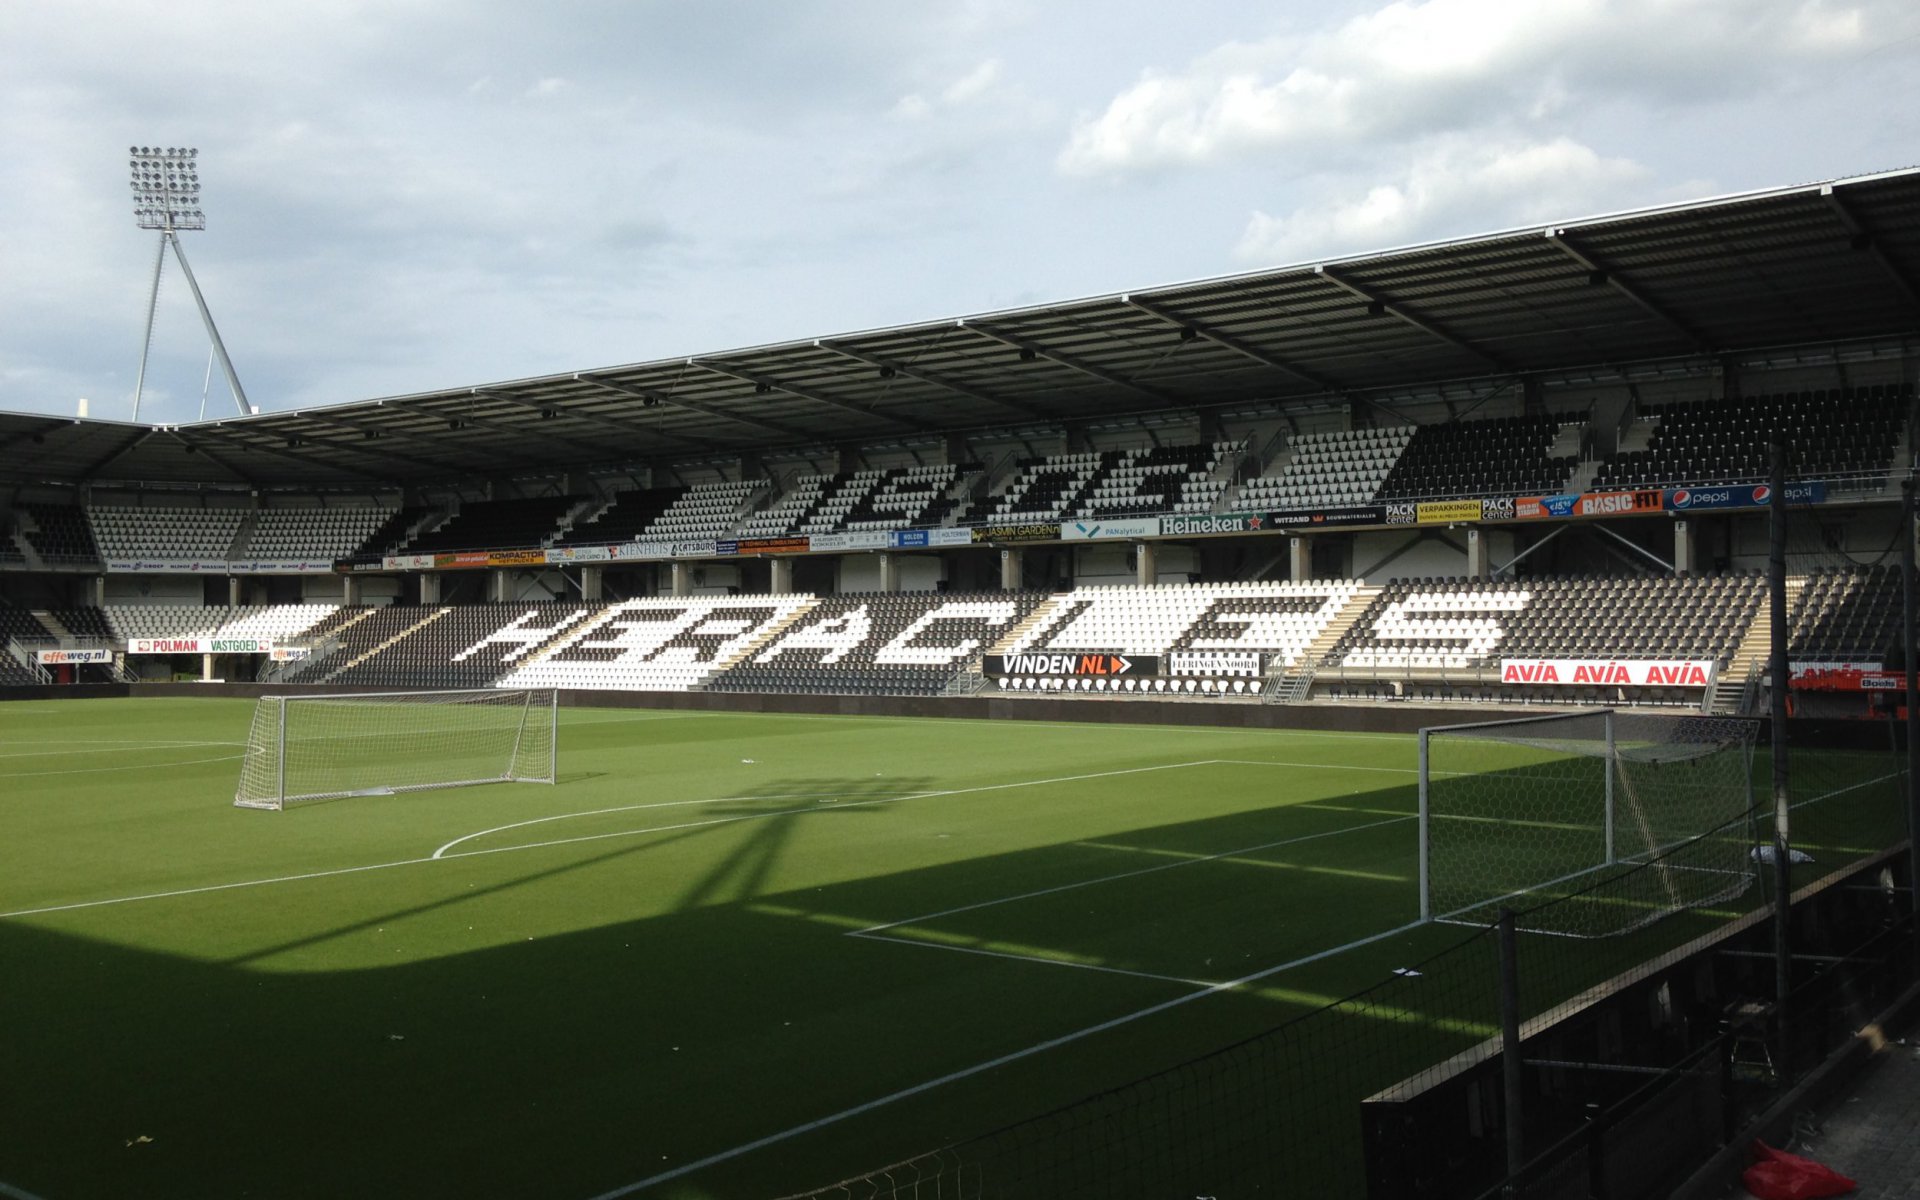 Palazzo - stadion Heracles Almelo 4